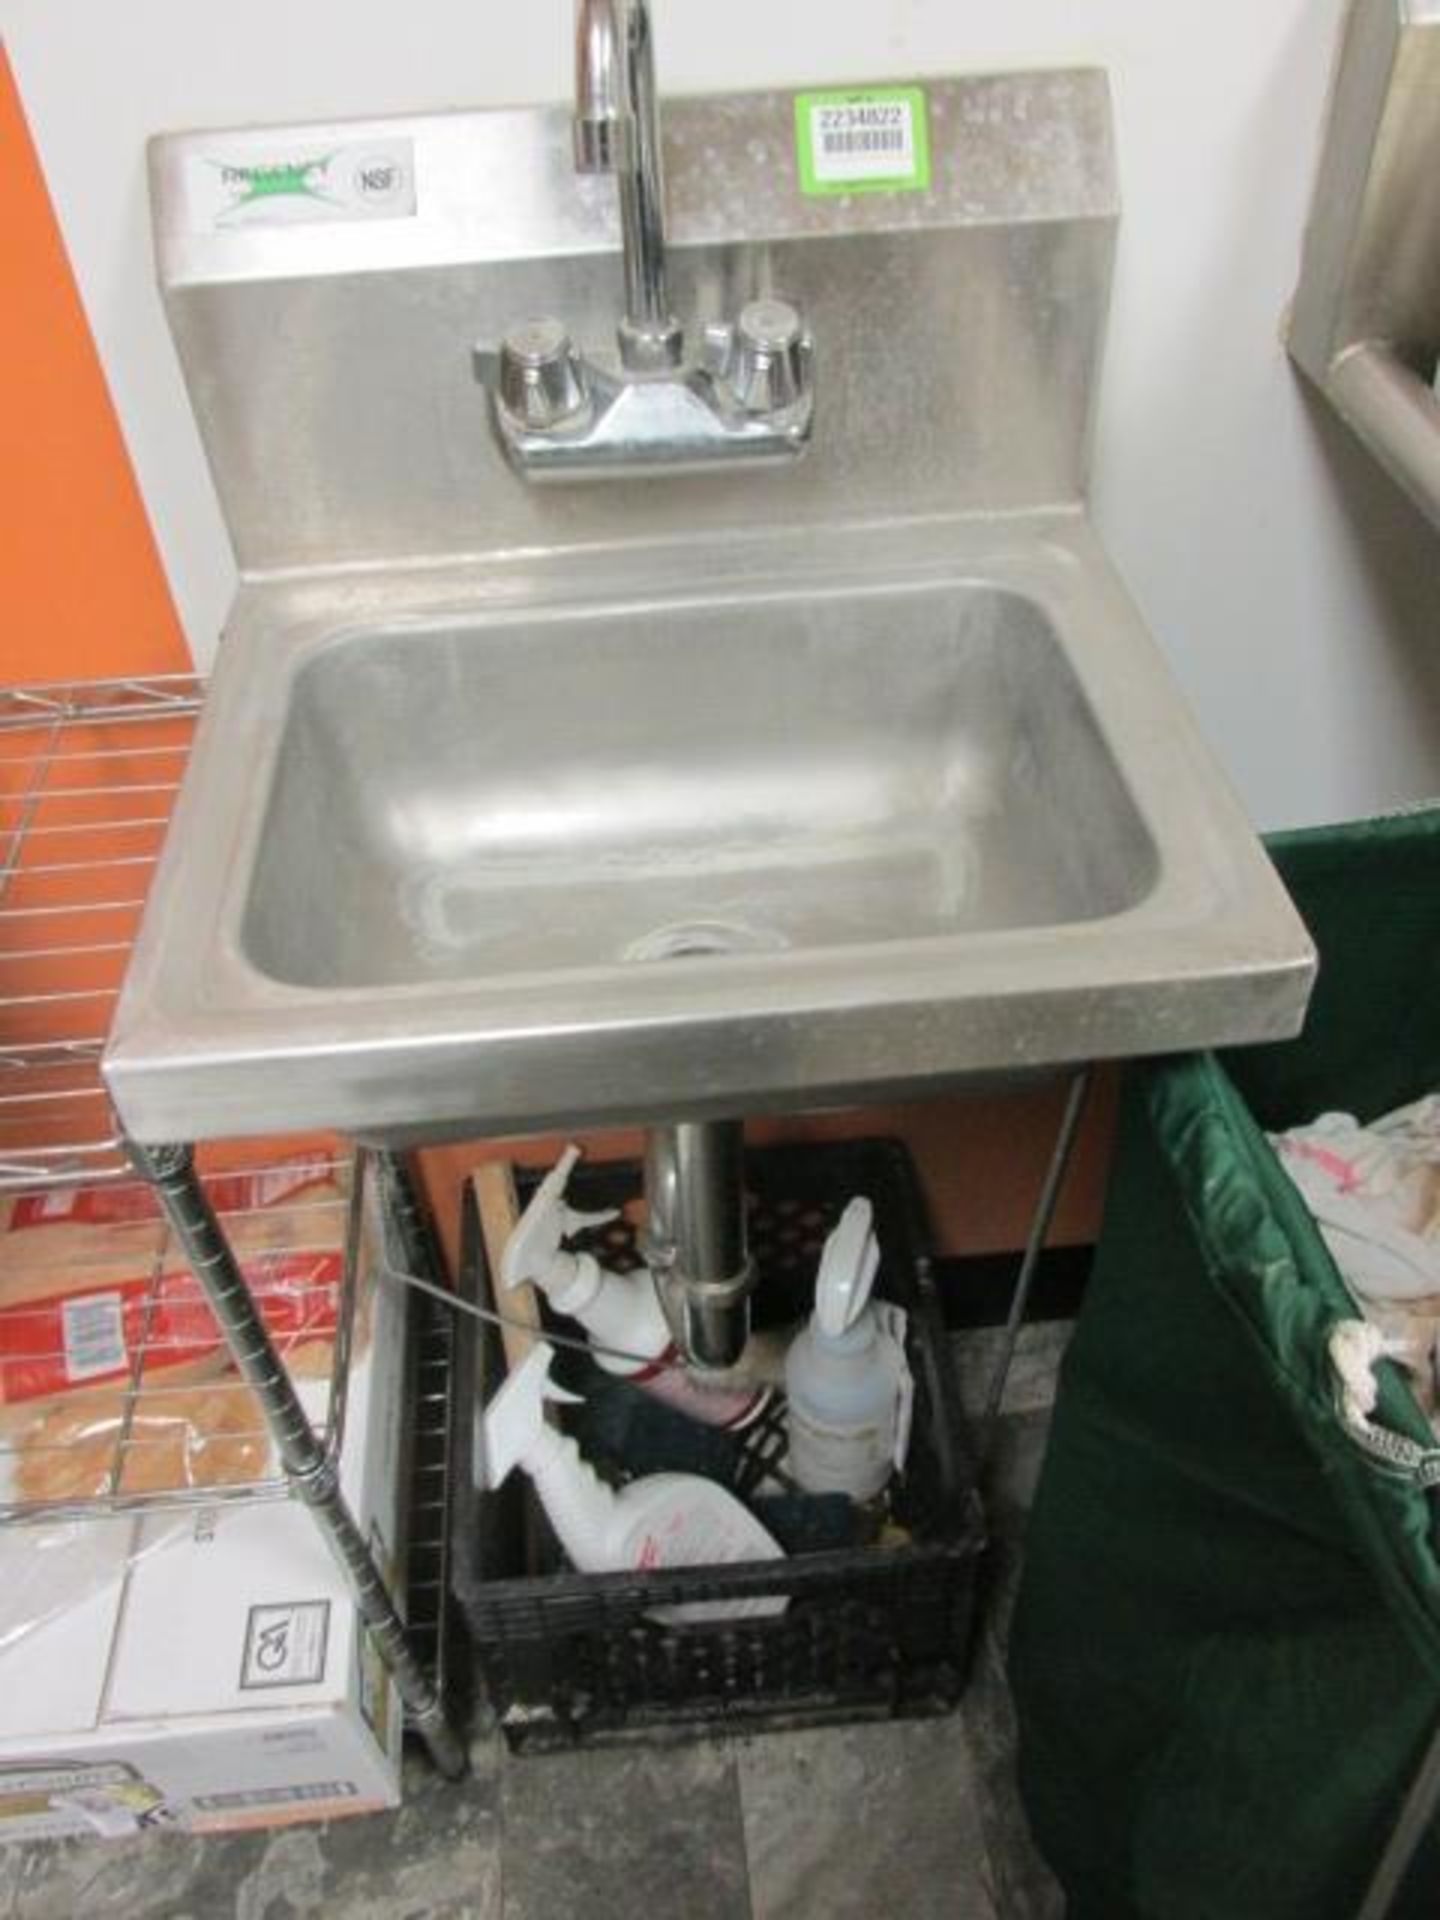 Regency Wall Mounted Wash Sink, 16" X 17". HIT# 2234822. Loc: Food Prep Room. Asset Located at 143